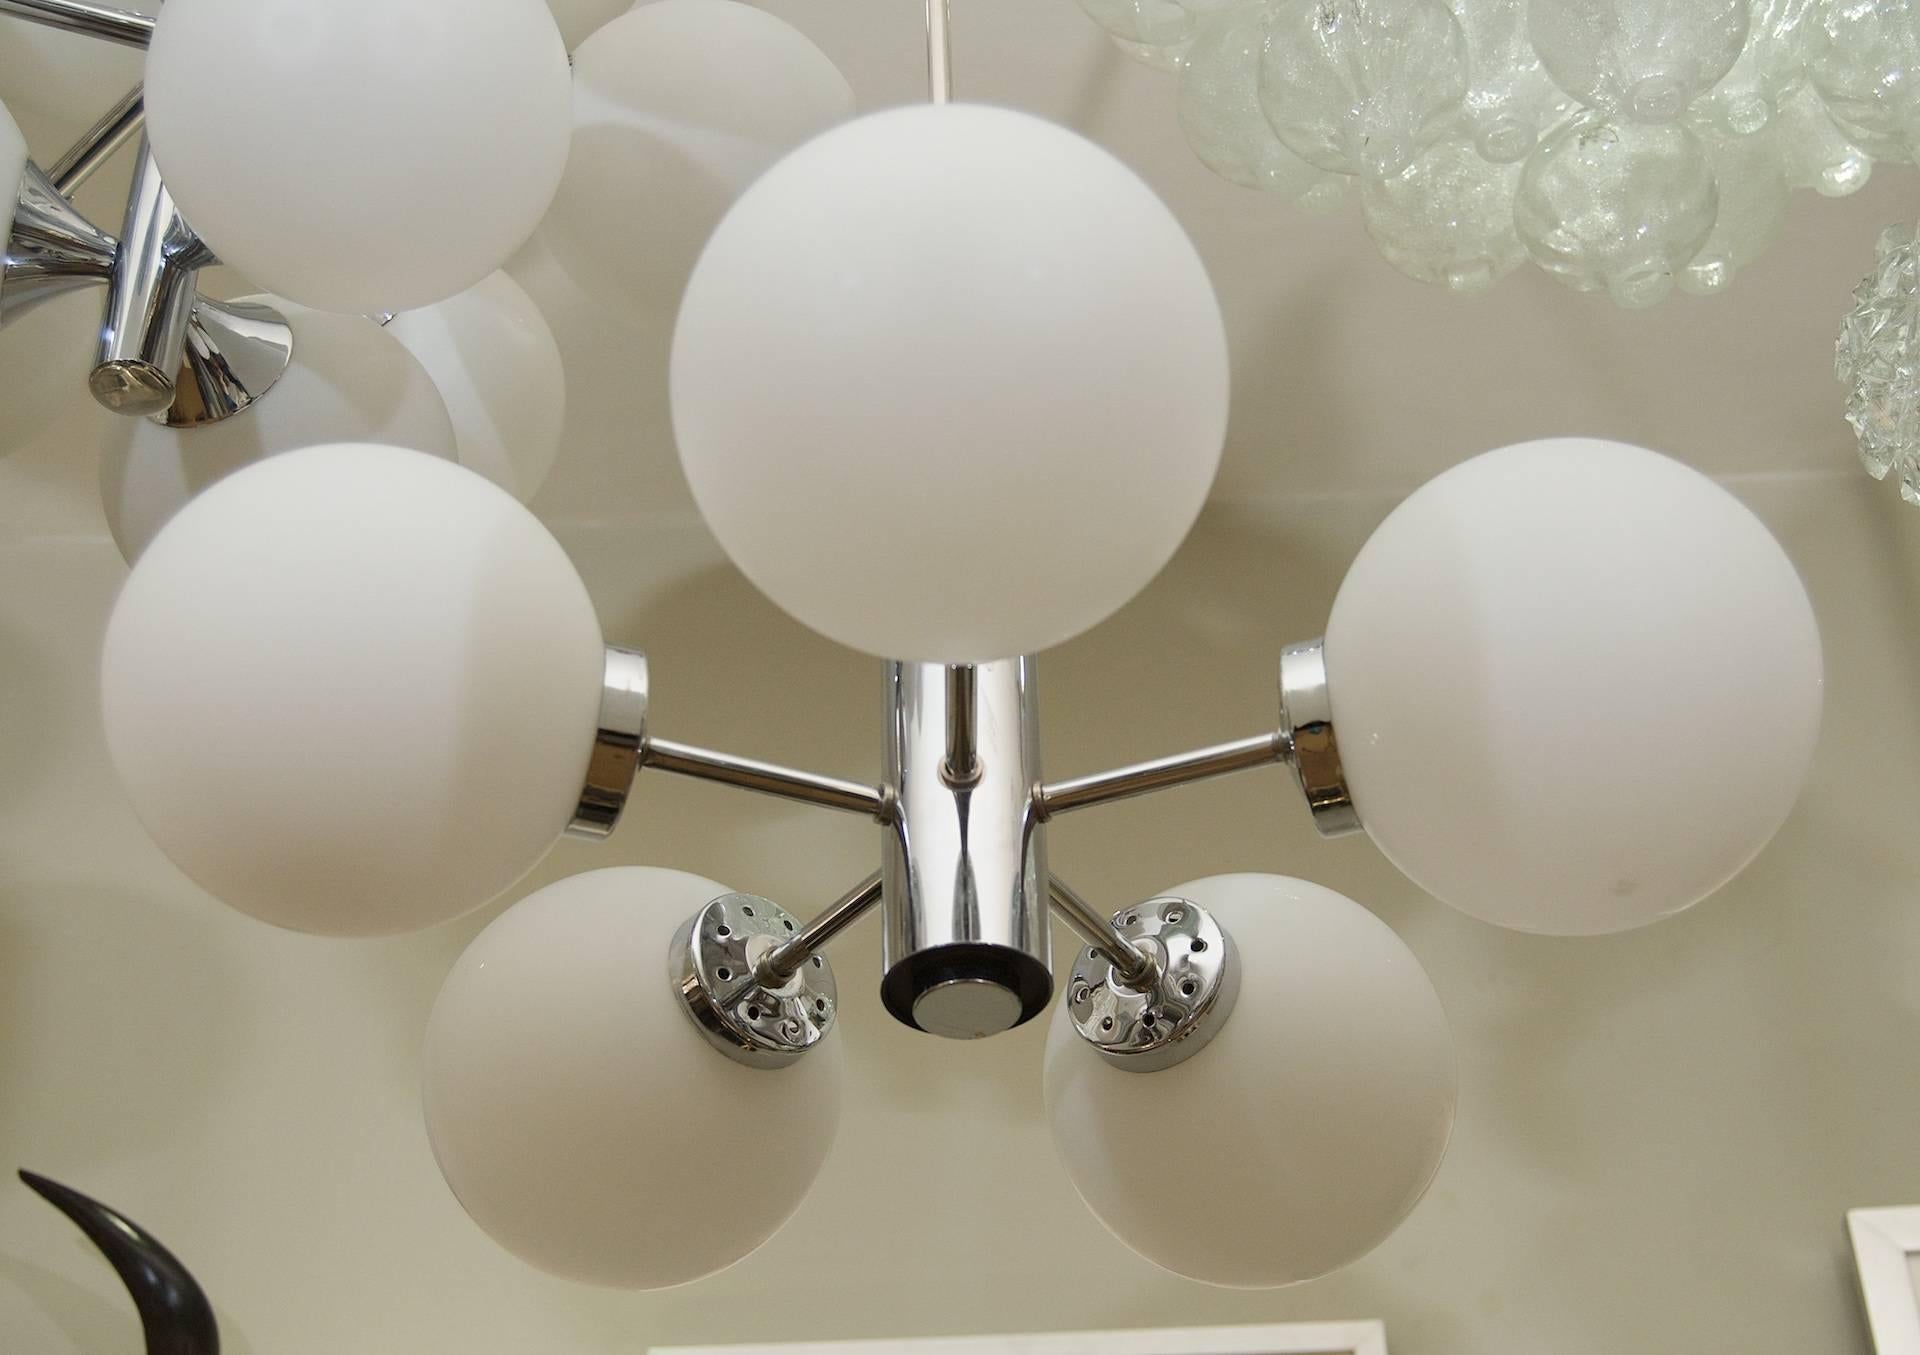 Five-armed chrome finish chandelier by Richard Essig with opal glass globes.

Takes 5 E-14 base bulbs up to 40 watts per bulb, new wiring.

Height listed is of chandelier body only; height as hung is 20